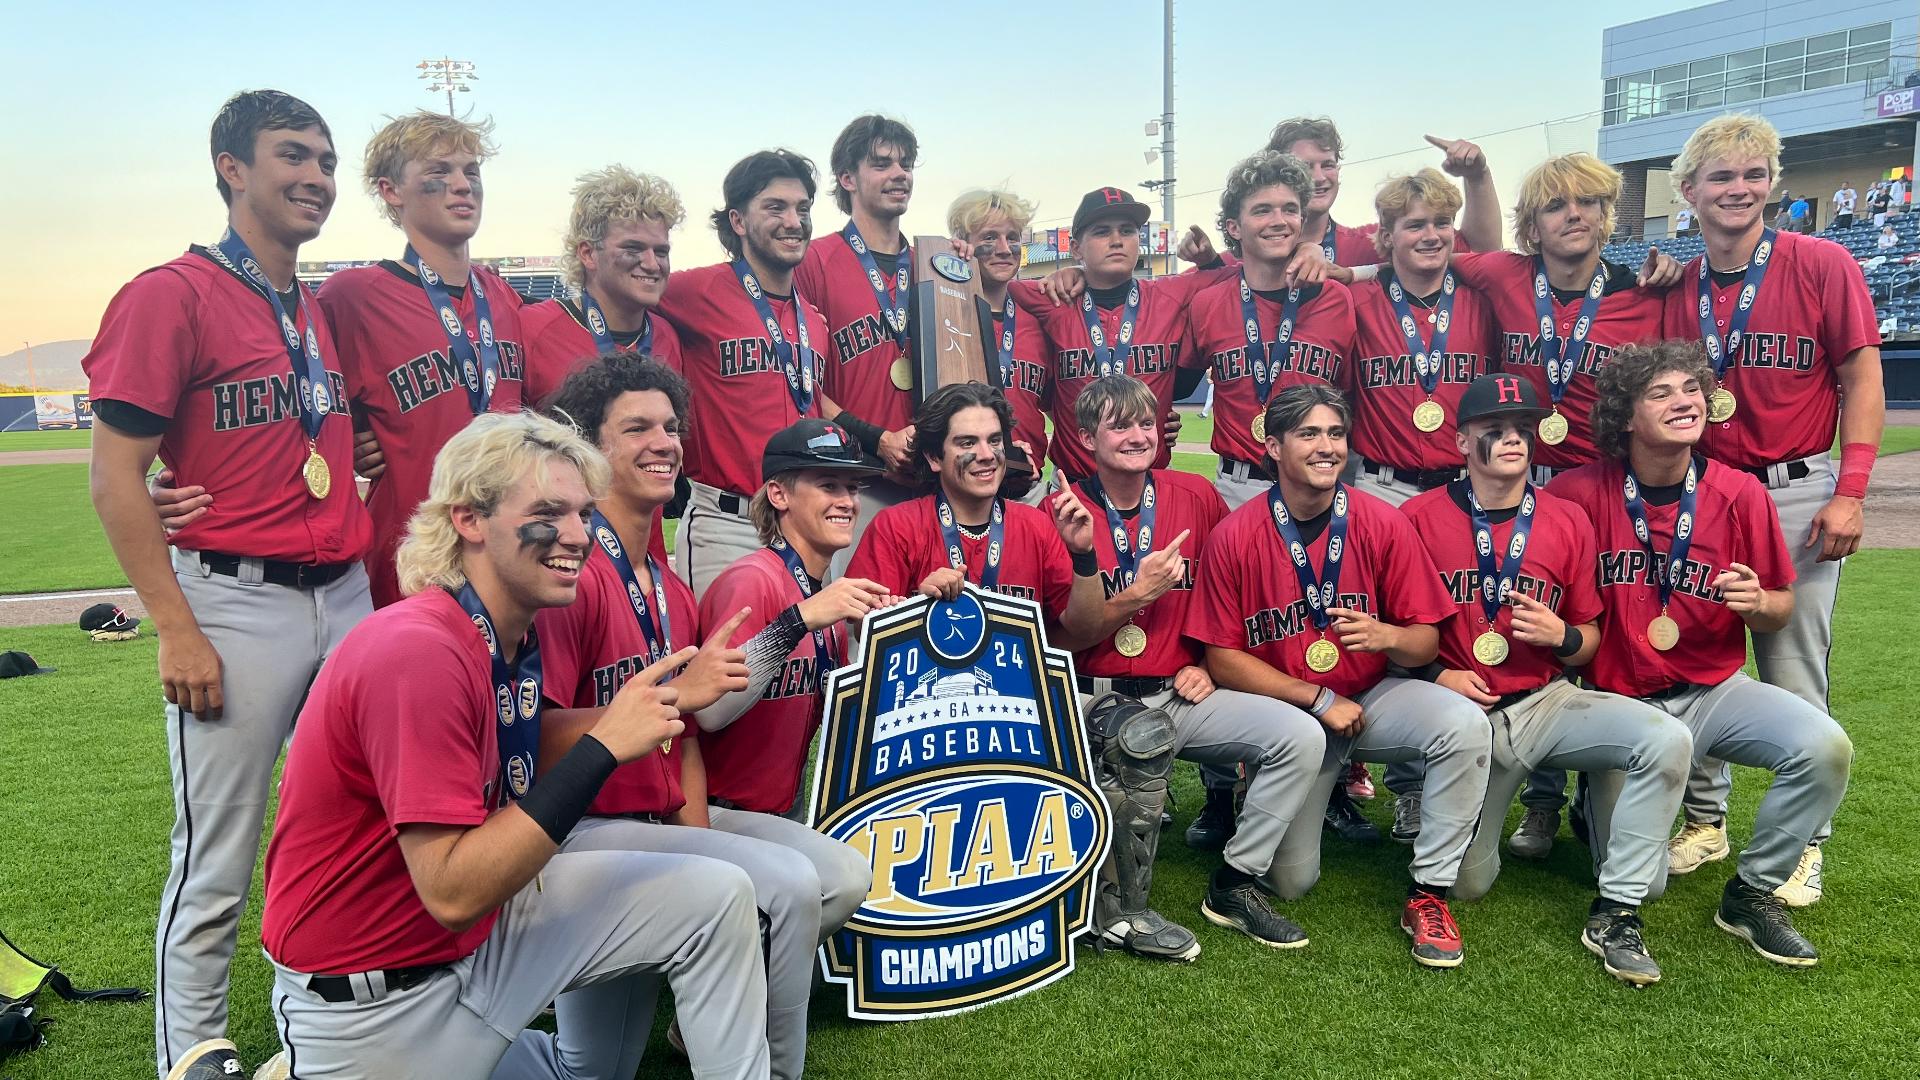 The Black Knights red hot hitting propelled them to another state title.